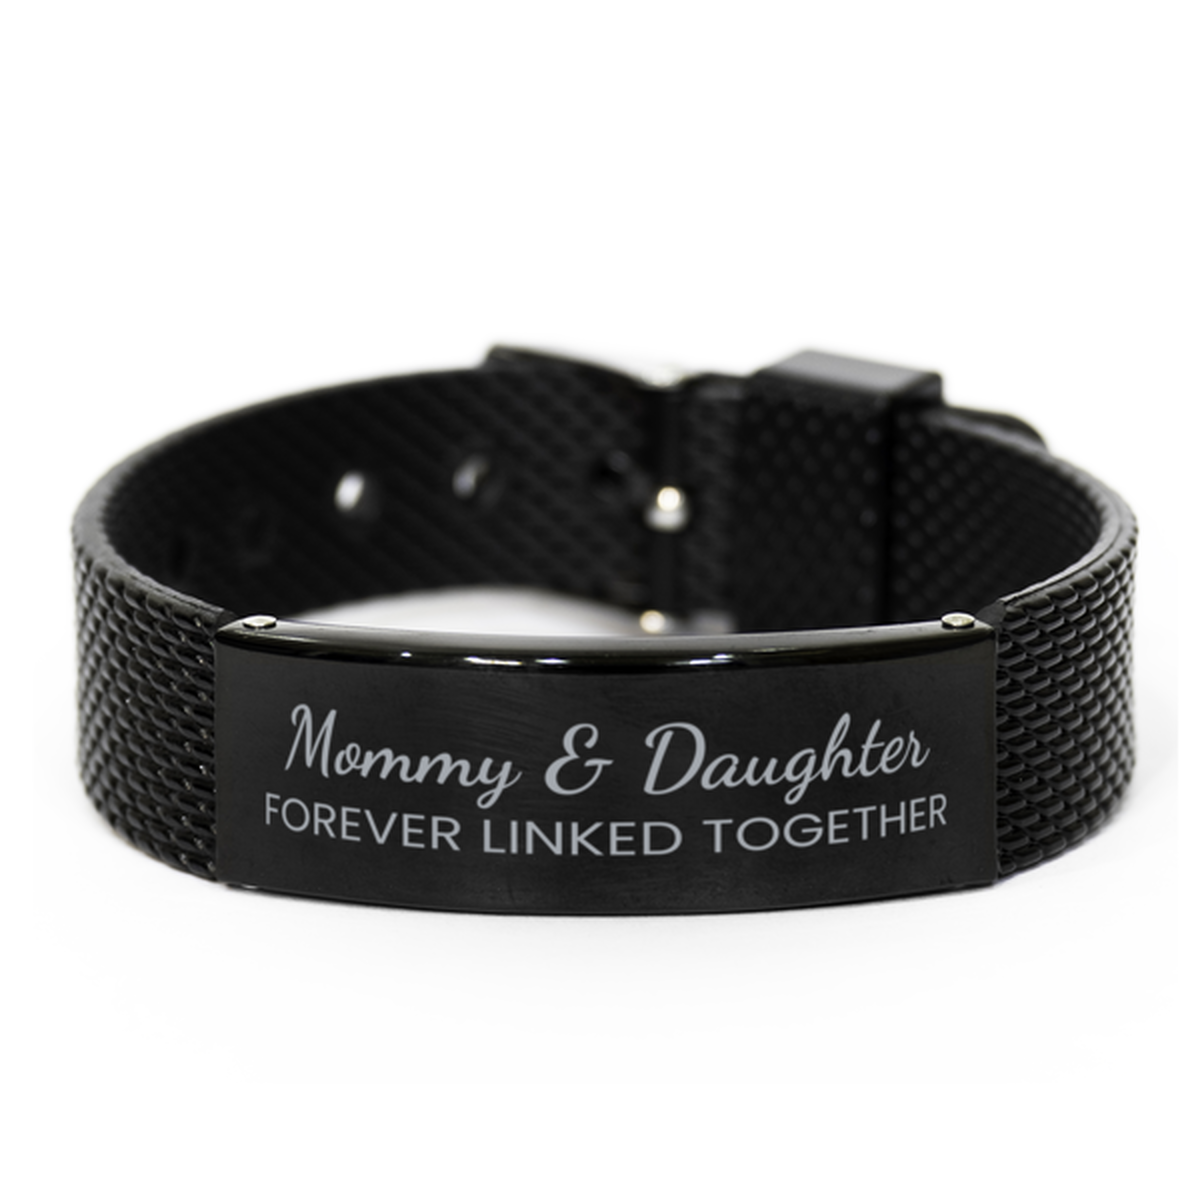 Mommy and Daughter Forever Linked Together Bracelet, Mommy Daughter Bracelet, Black Stainless Steel Leather Bracelet, Birthday, Christmas.